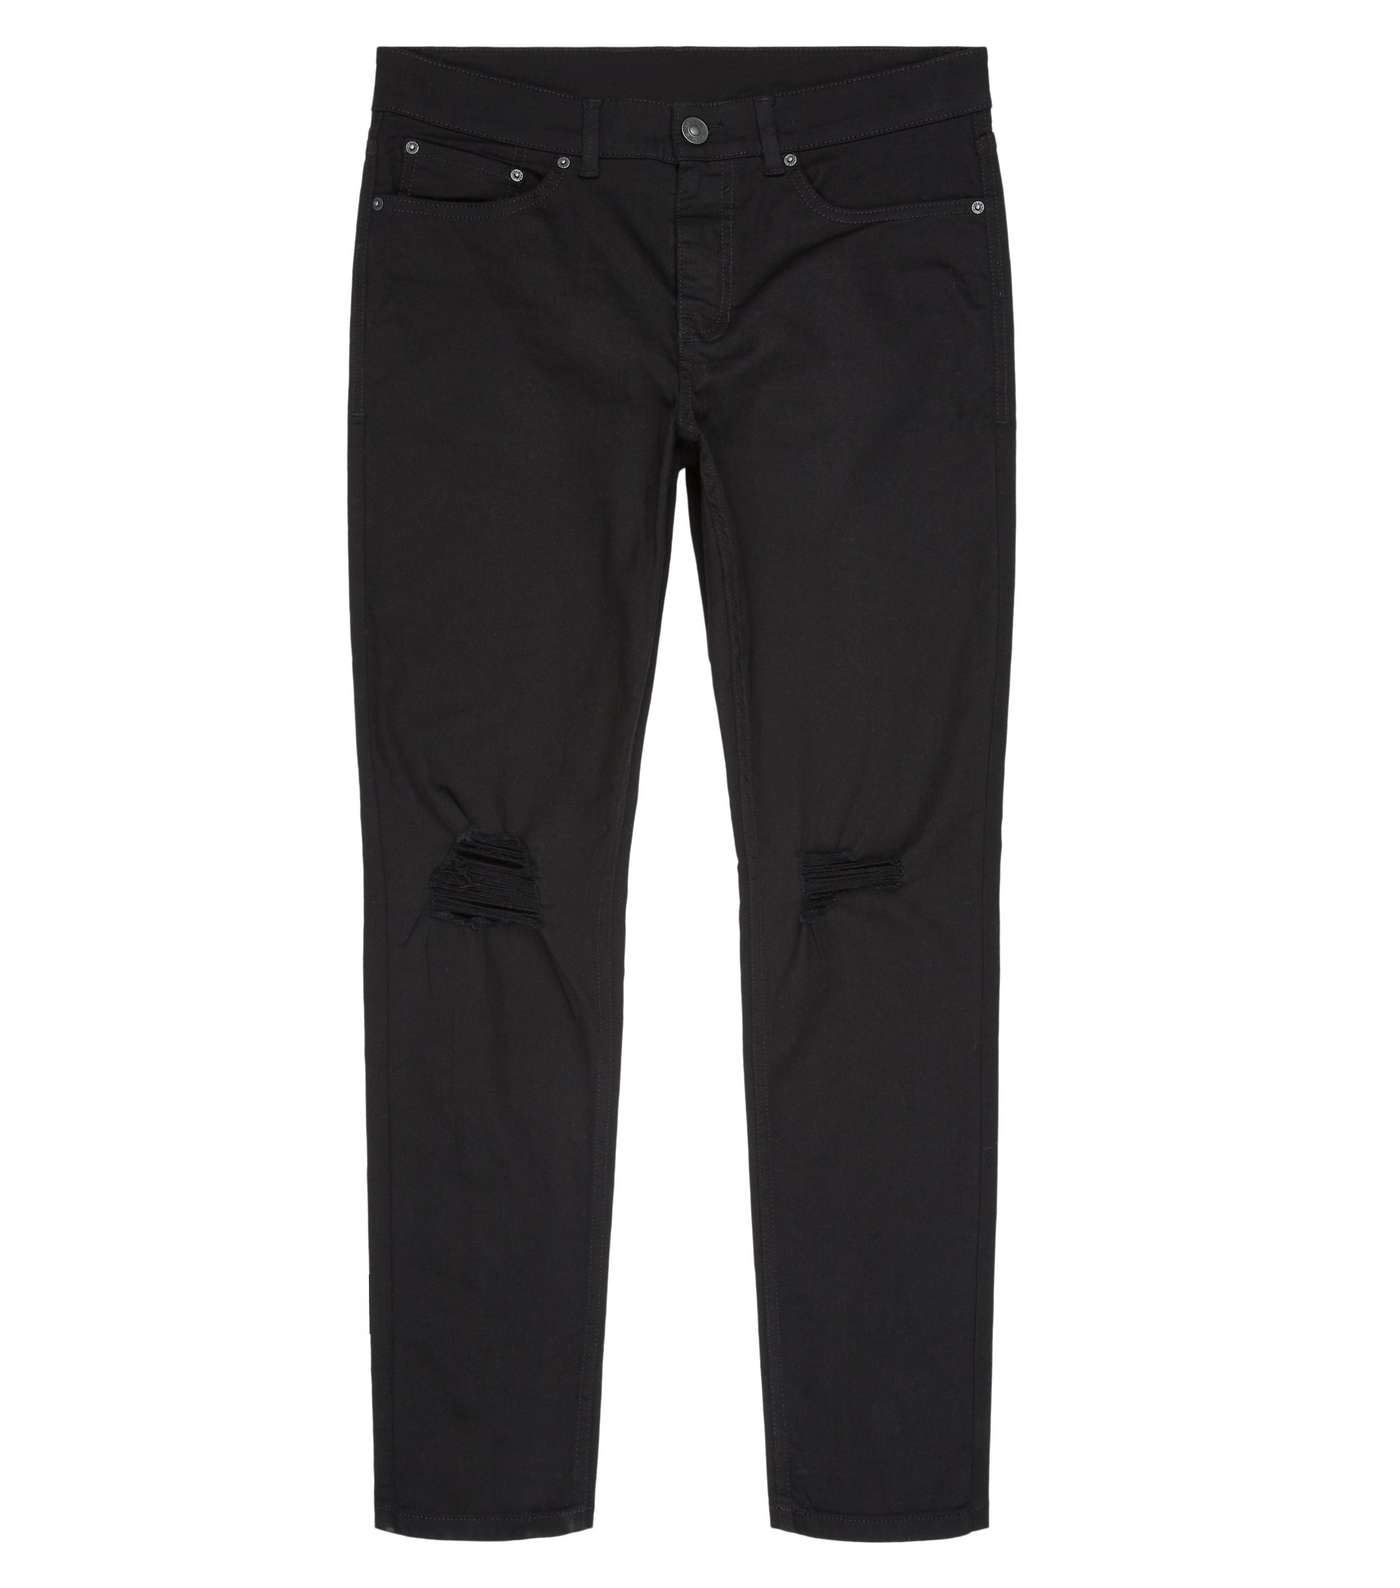 Black Ripped Knee Skinny Stretch Jeans Image 4